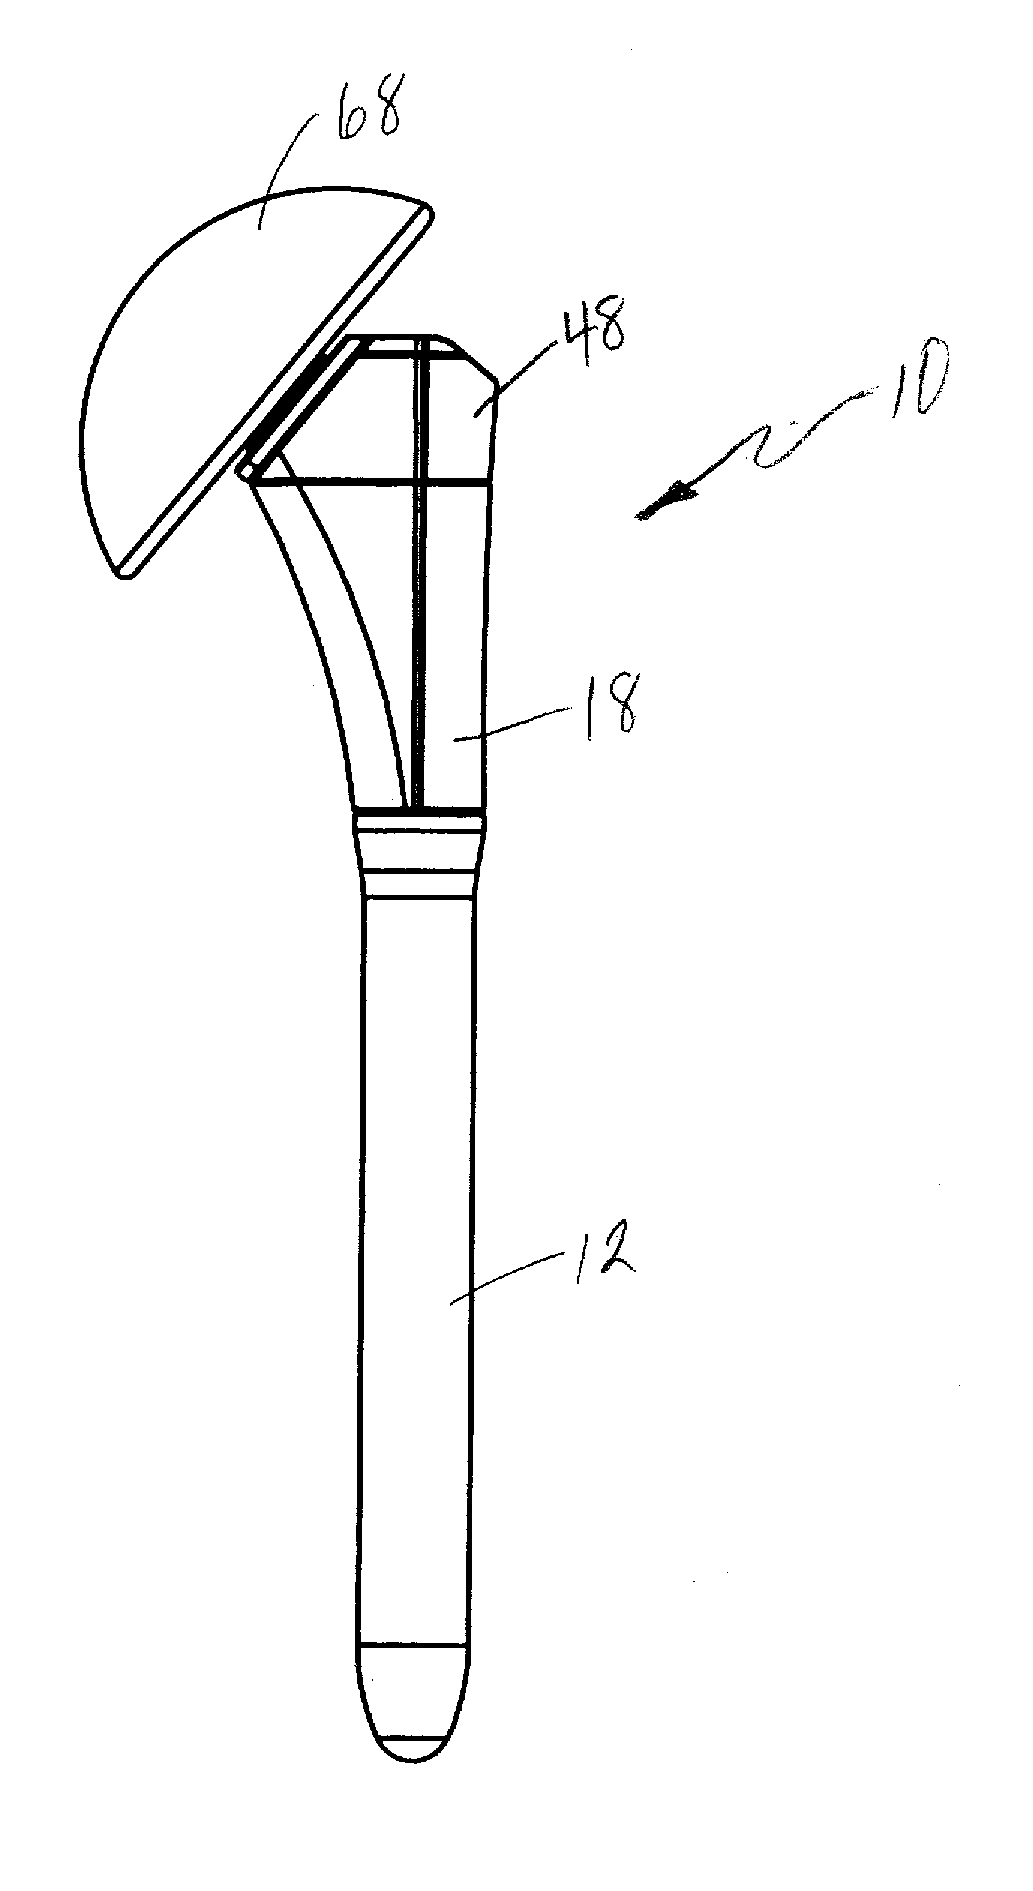 Modular shoulder prosthesis with load bearing surface